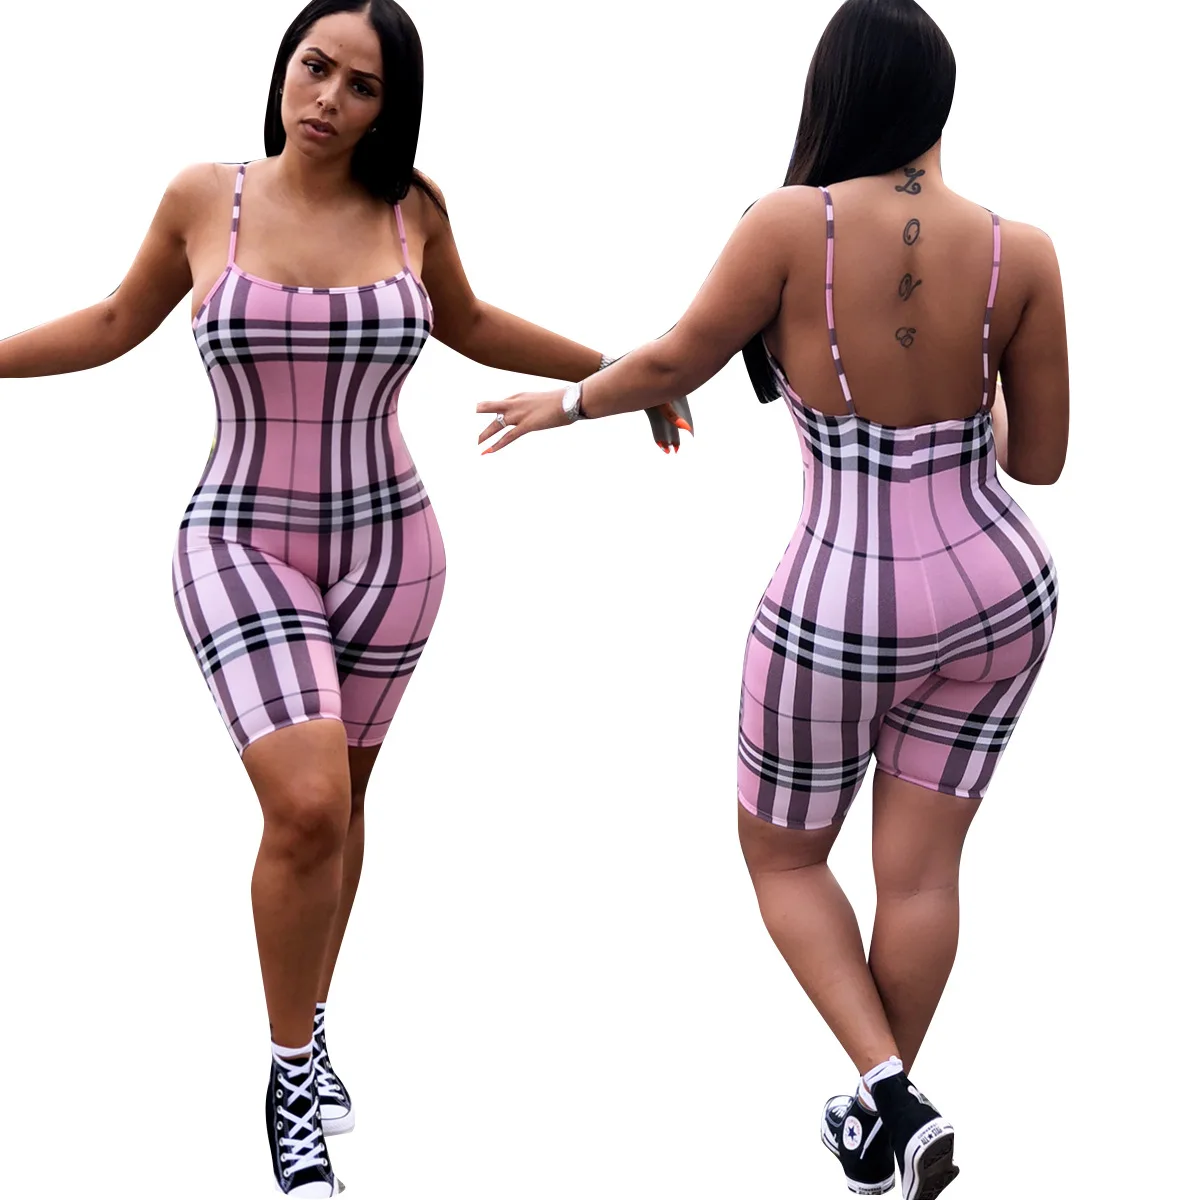 Fashion Jumpsuit for Women 2020 Summer Spaghetti Straps Plaid Print Skinny Playsuit Overalls Short Rompers Women Jumpsuit images - 6